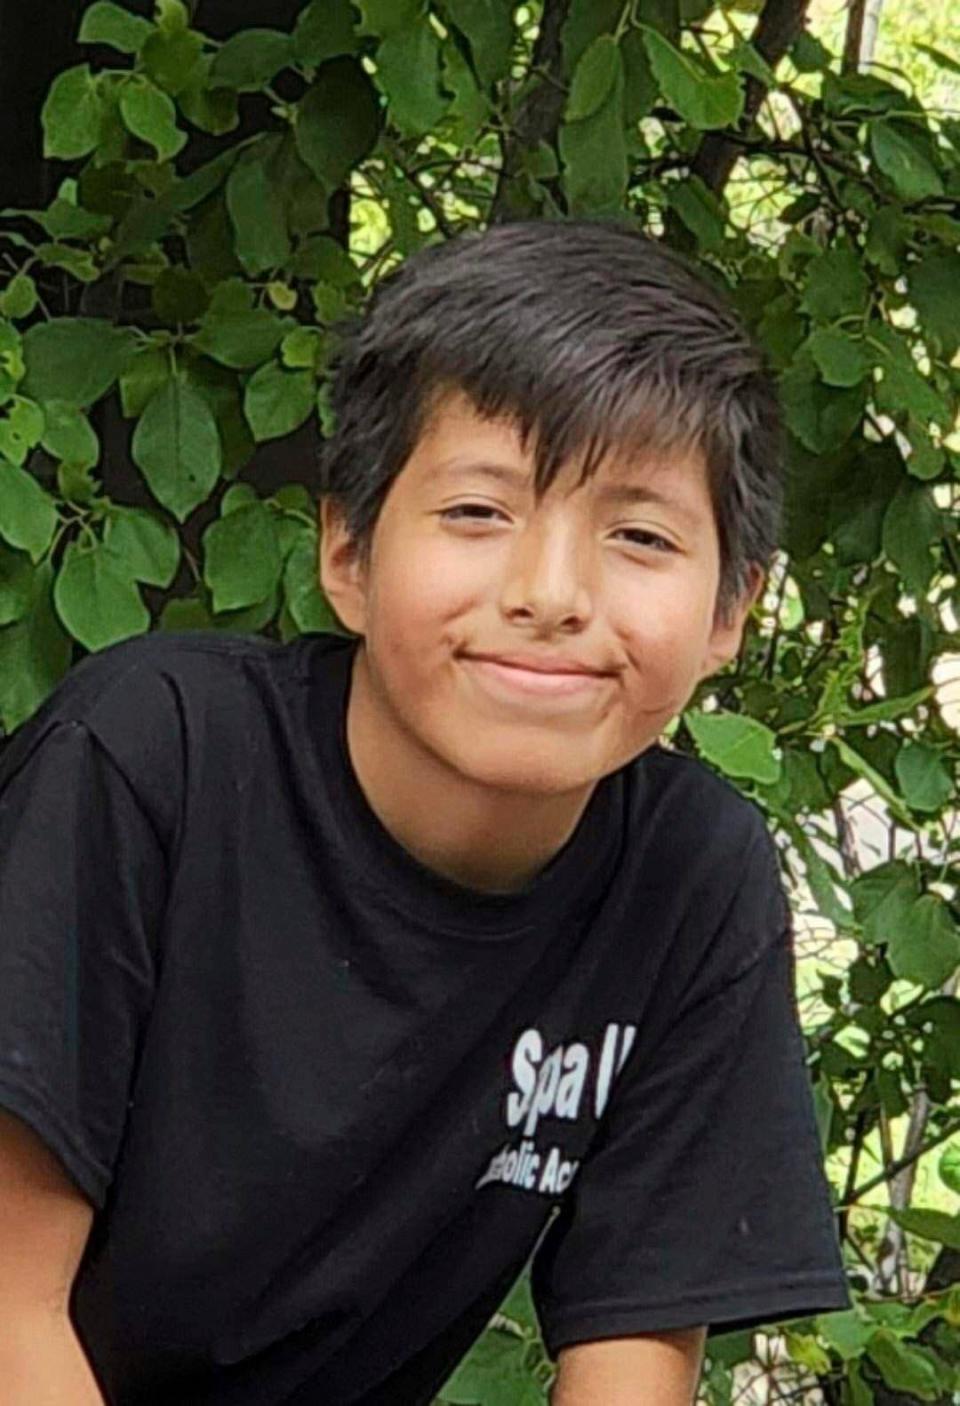 Honor Beauvais in 6th grade at Sapa Un Catholic Academy, St. Francis, S.D. Beauvais died last month as a snow battered the Rosebud Sioux Reservation in South Dakota after an ambulance couldn’t get to him in time. He was asthmatic and had influenza. (Cordier Beauvais via AP)